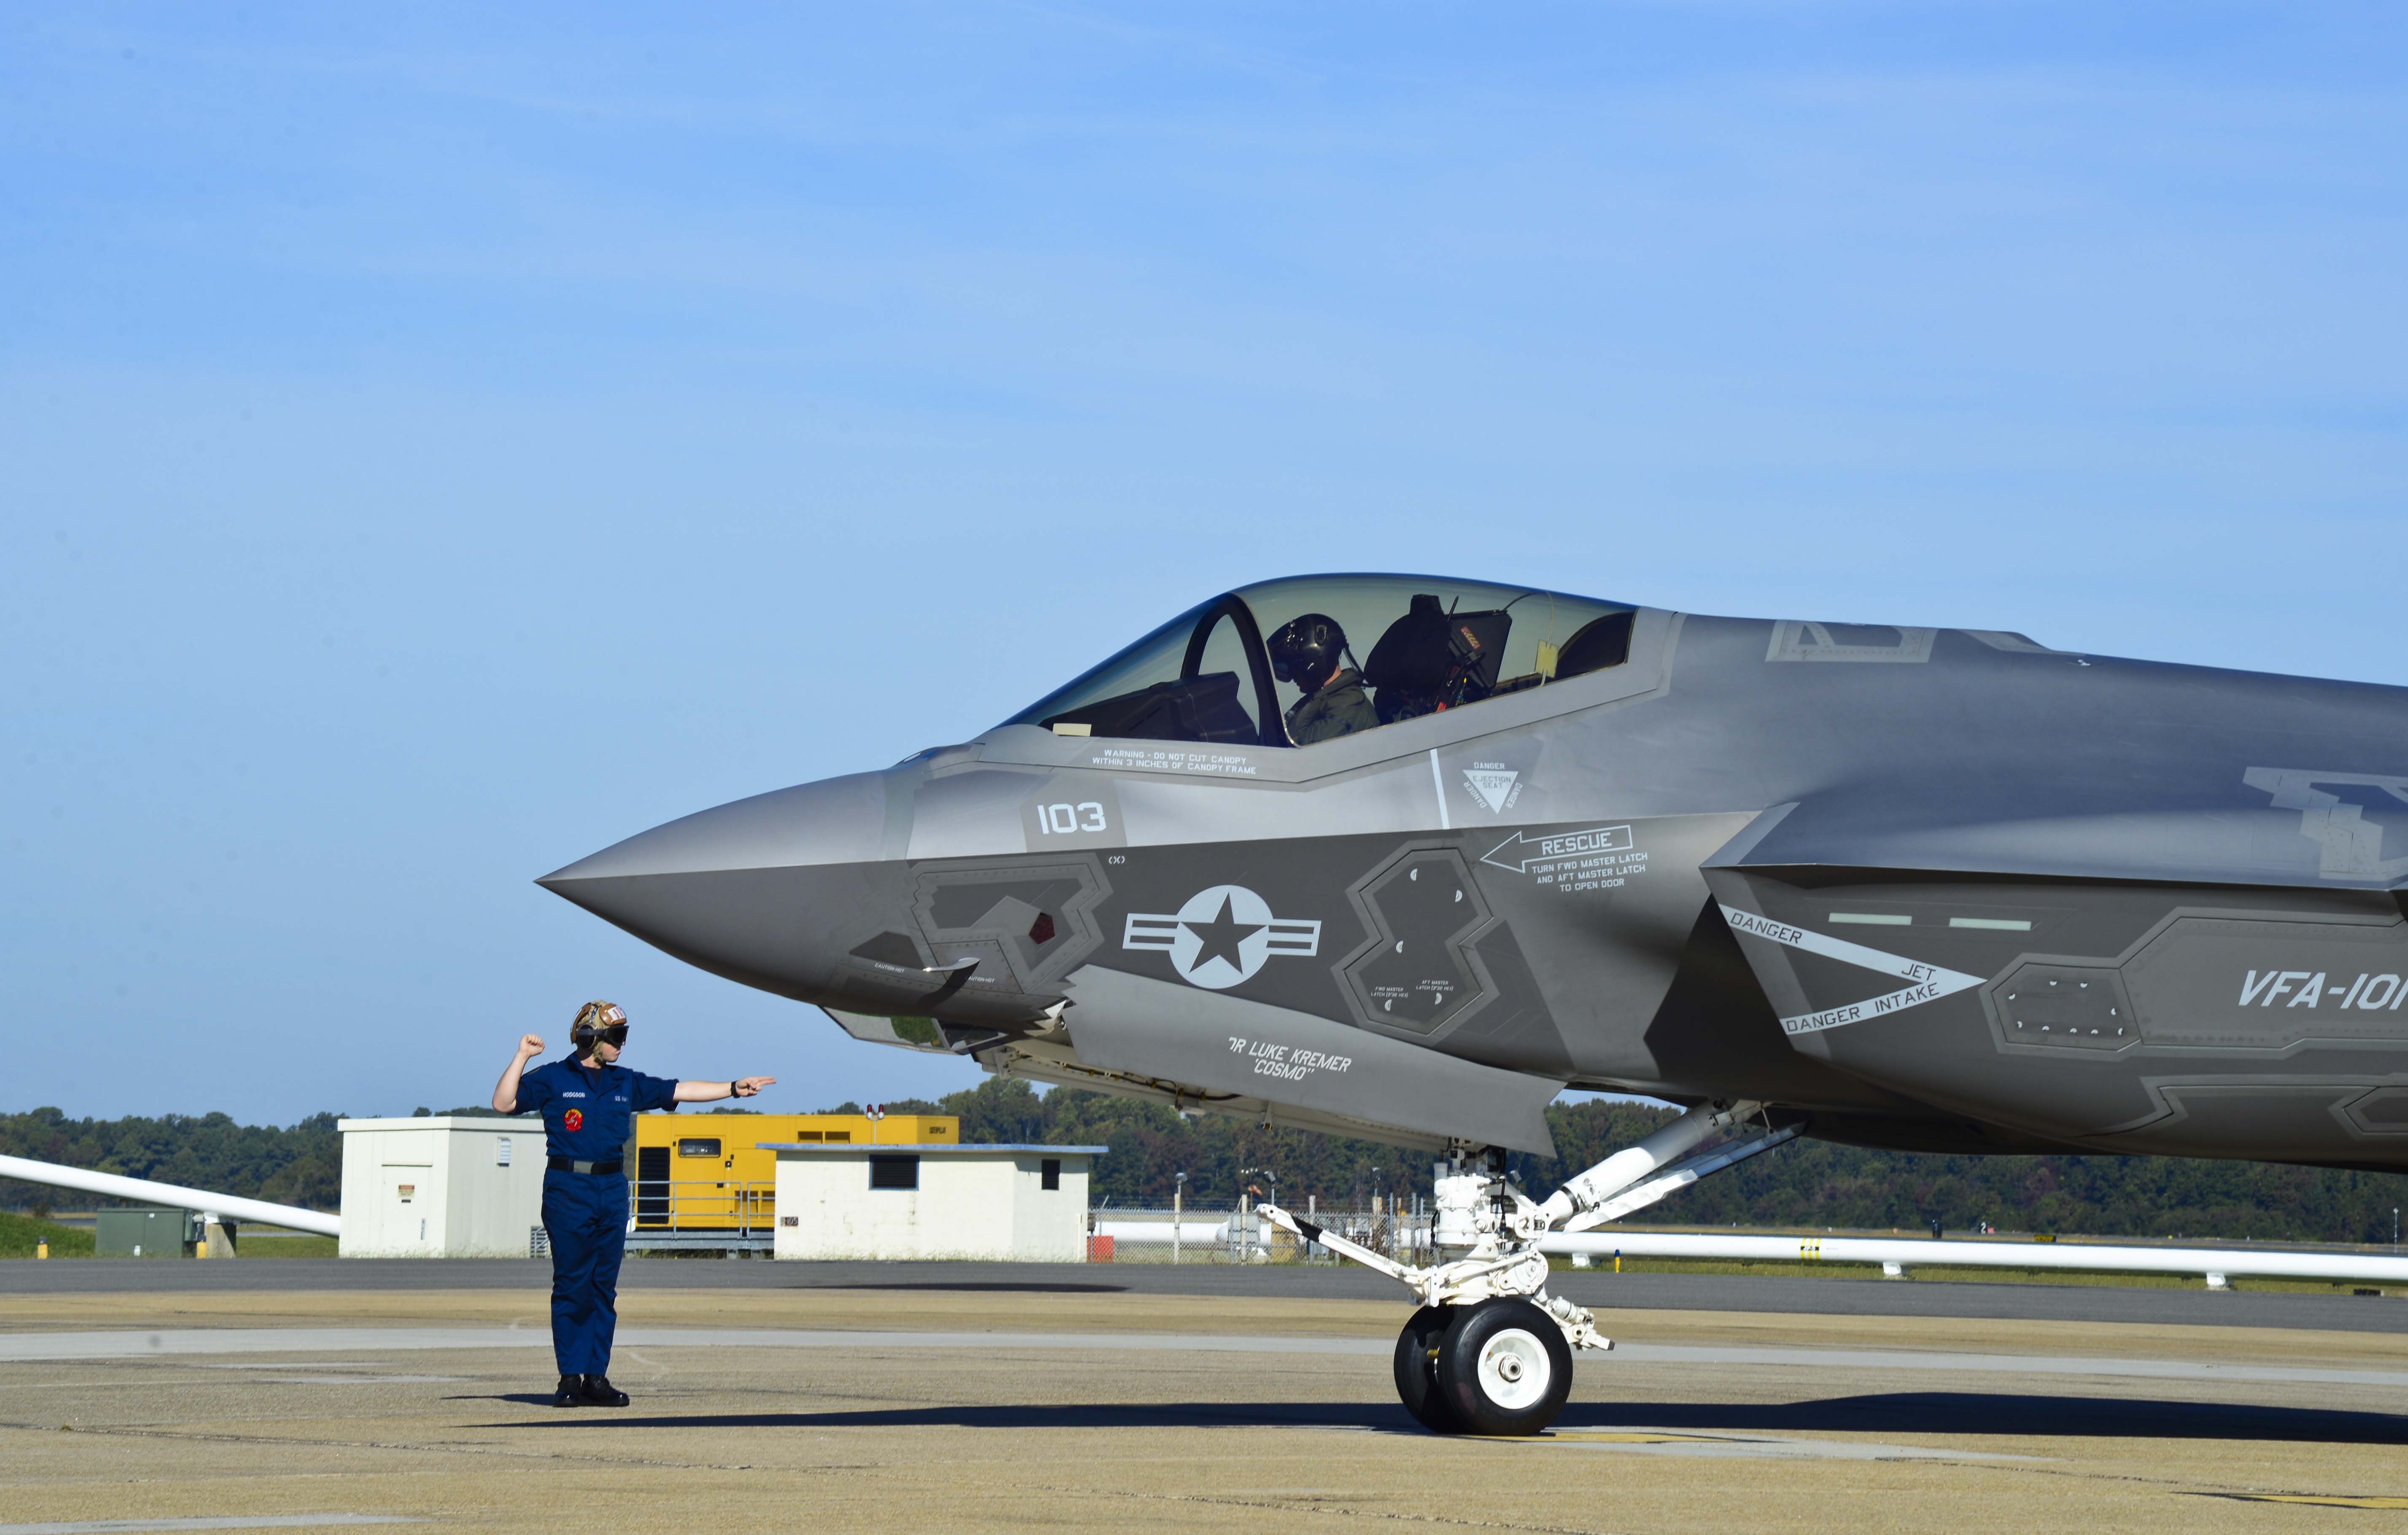 Lt. Scott Cleveland, assigned to Strike Fighter Squadron (VFA) 101, is directed to park the F-35C Lightning II Joint Strike Fighter after landing at Naval Air Station Oceana. US Navy Photo